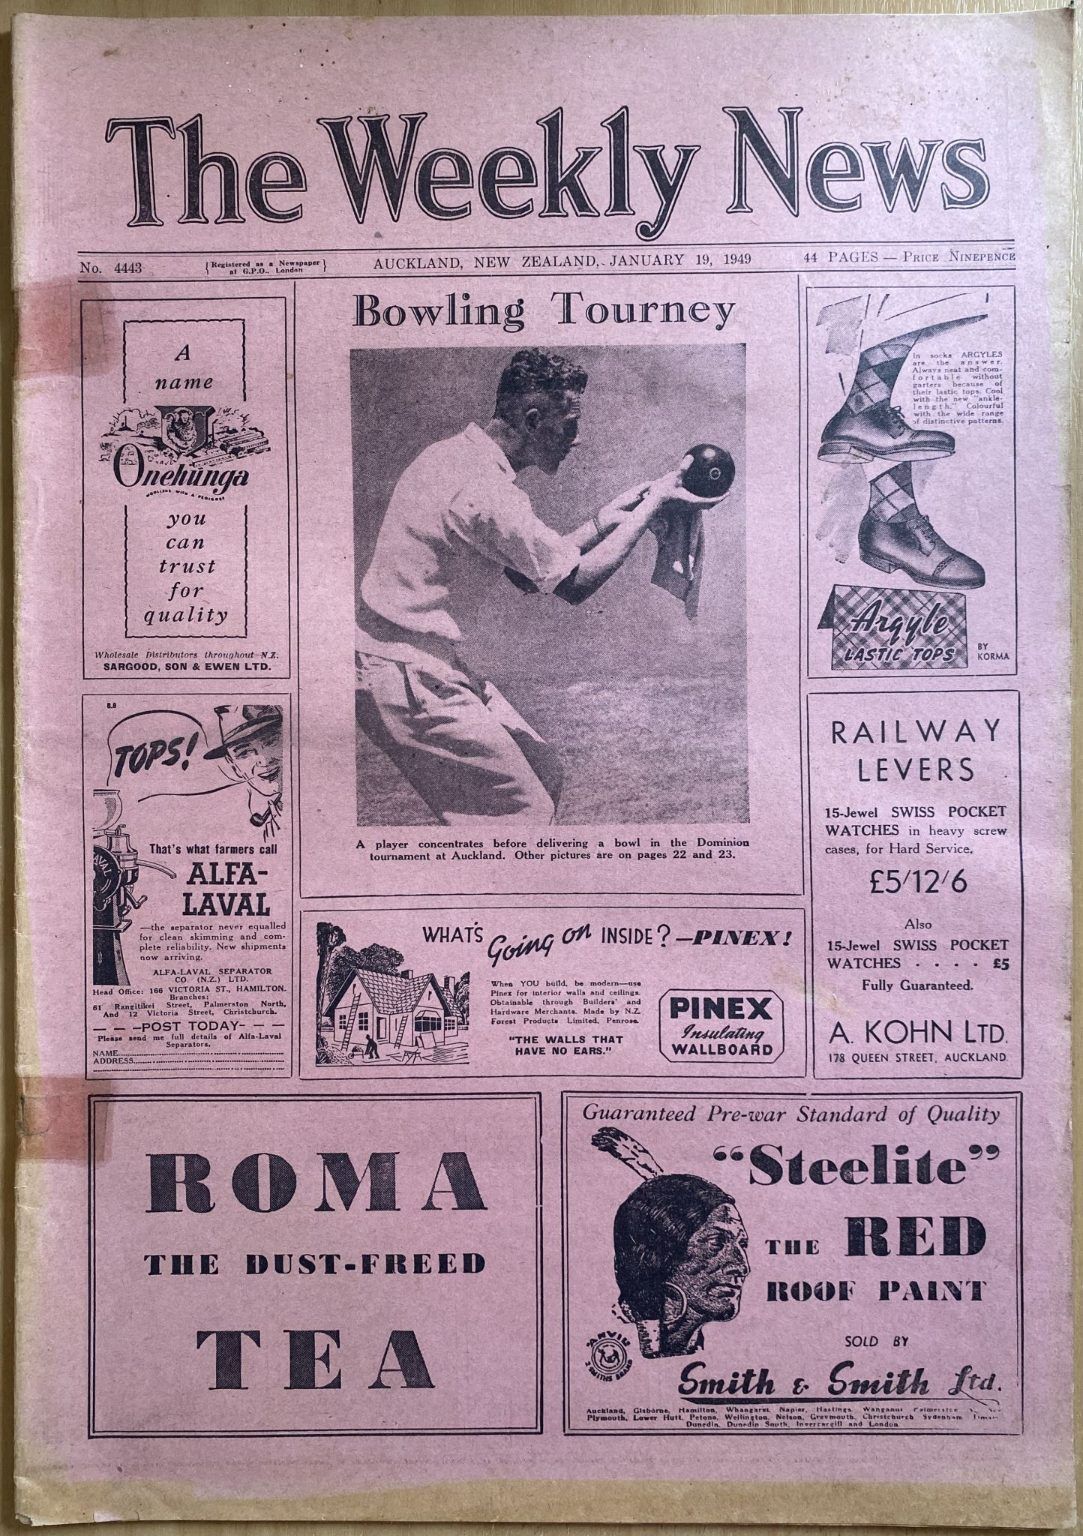 OLD NEWSPAPER: The Weekly News, No. 4443, 19 January 1949